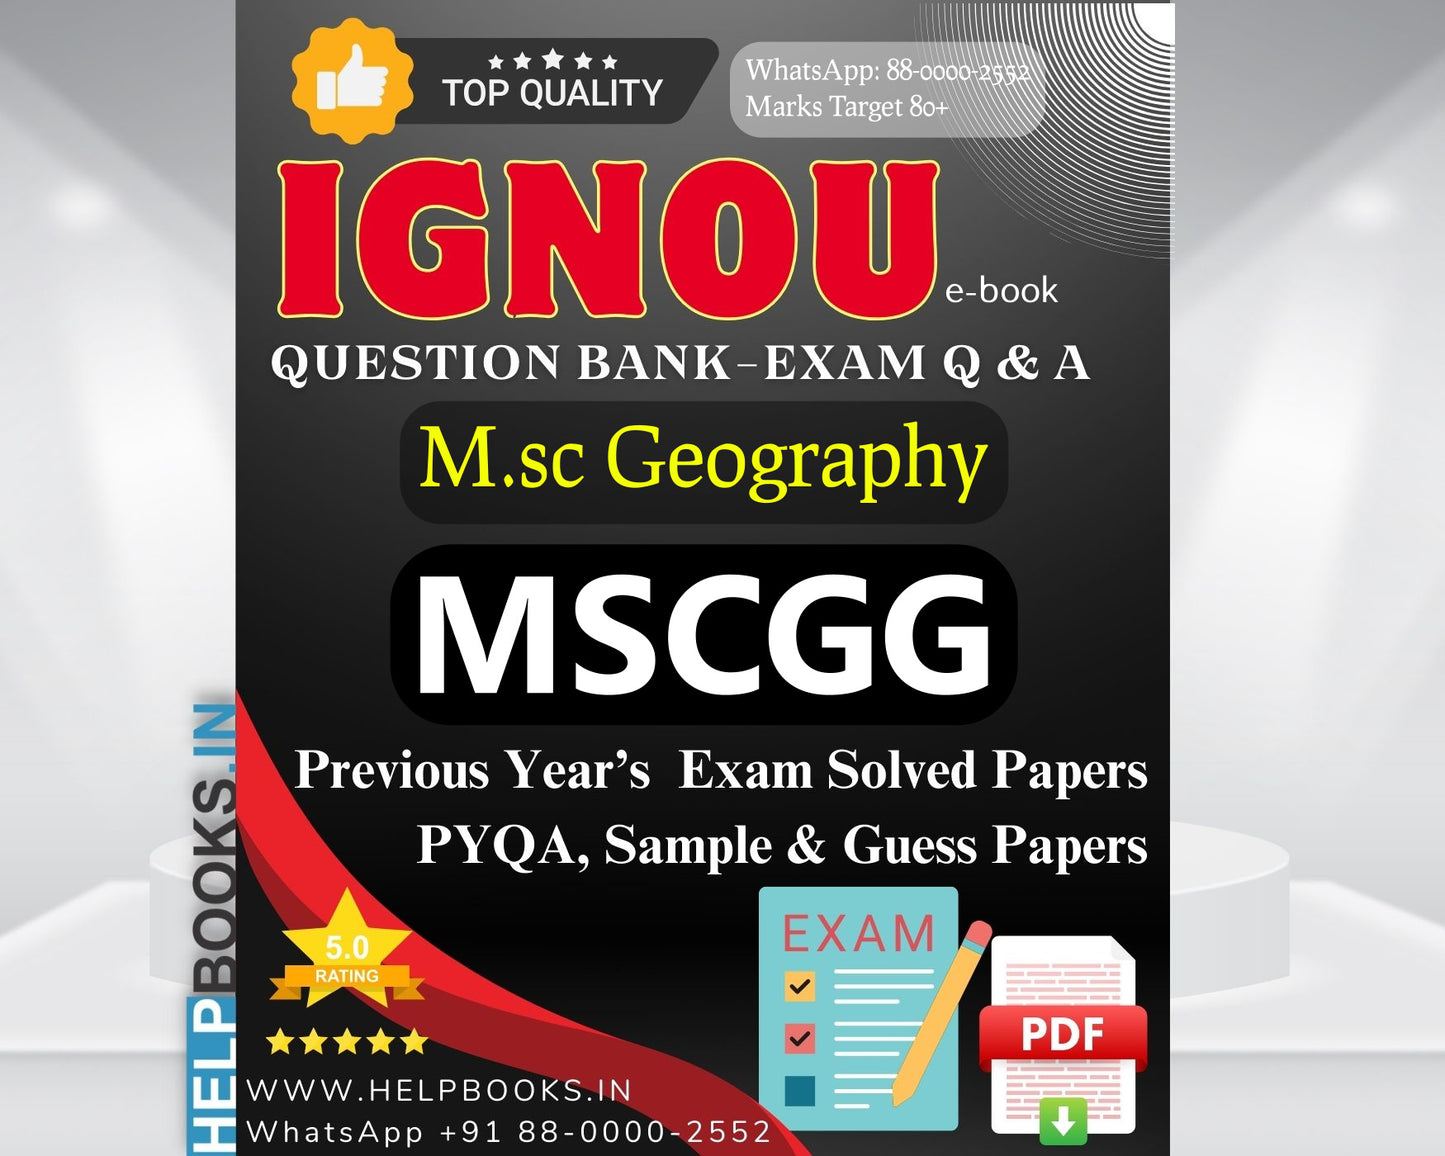 MSCGG IGNOU Exam Combo of 5 Solved Sample Guess Papers for Master of Science Geography